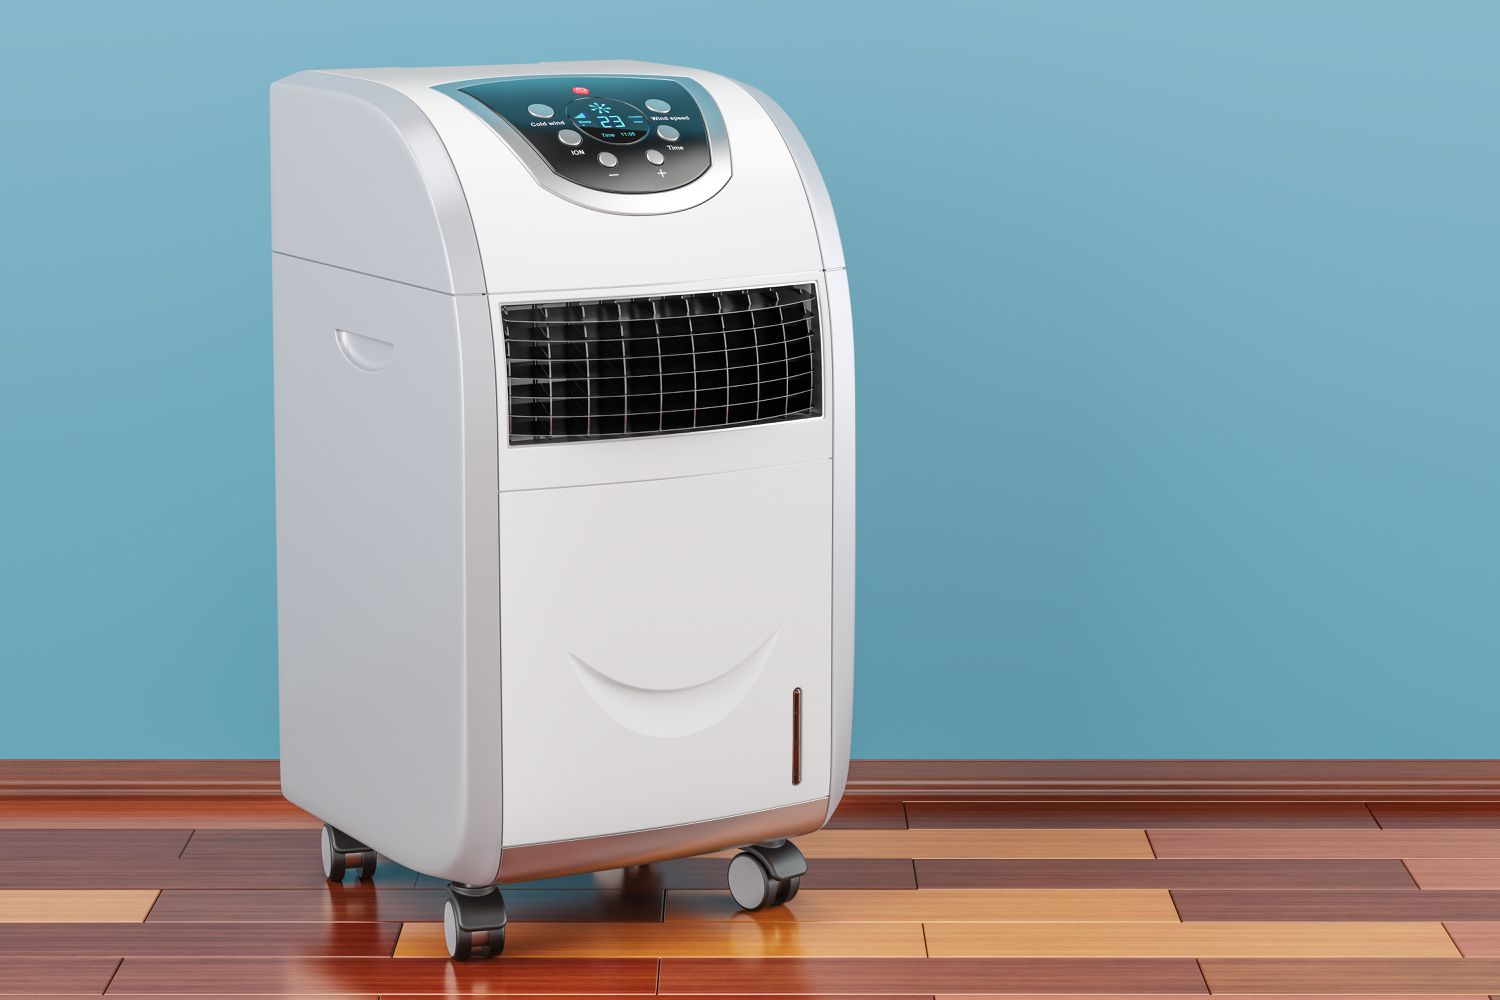 How To Make A Portable Air Conditioner